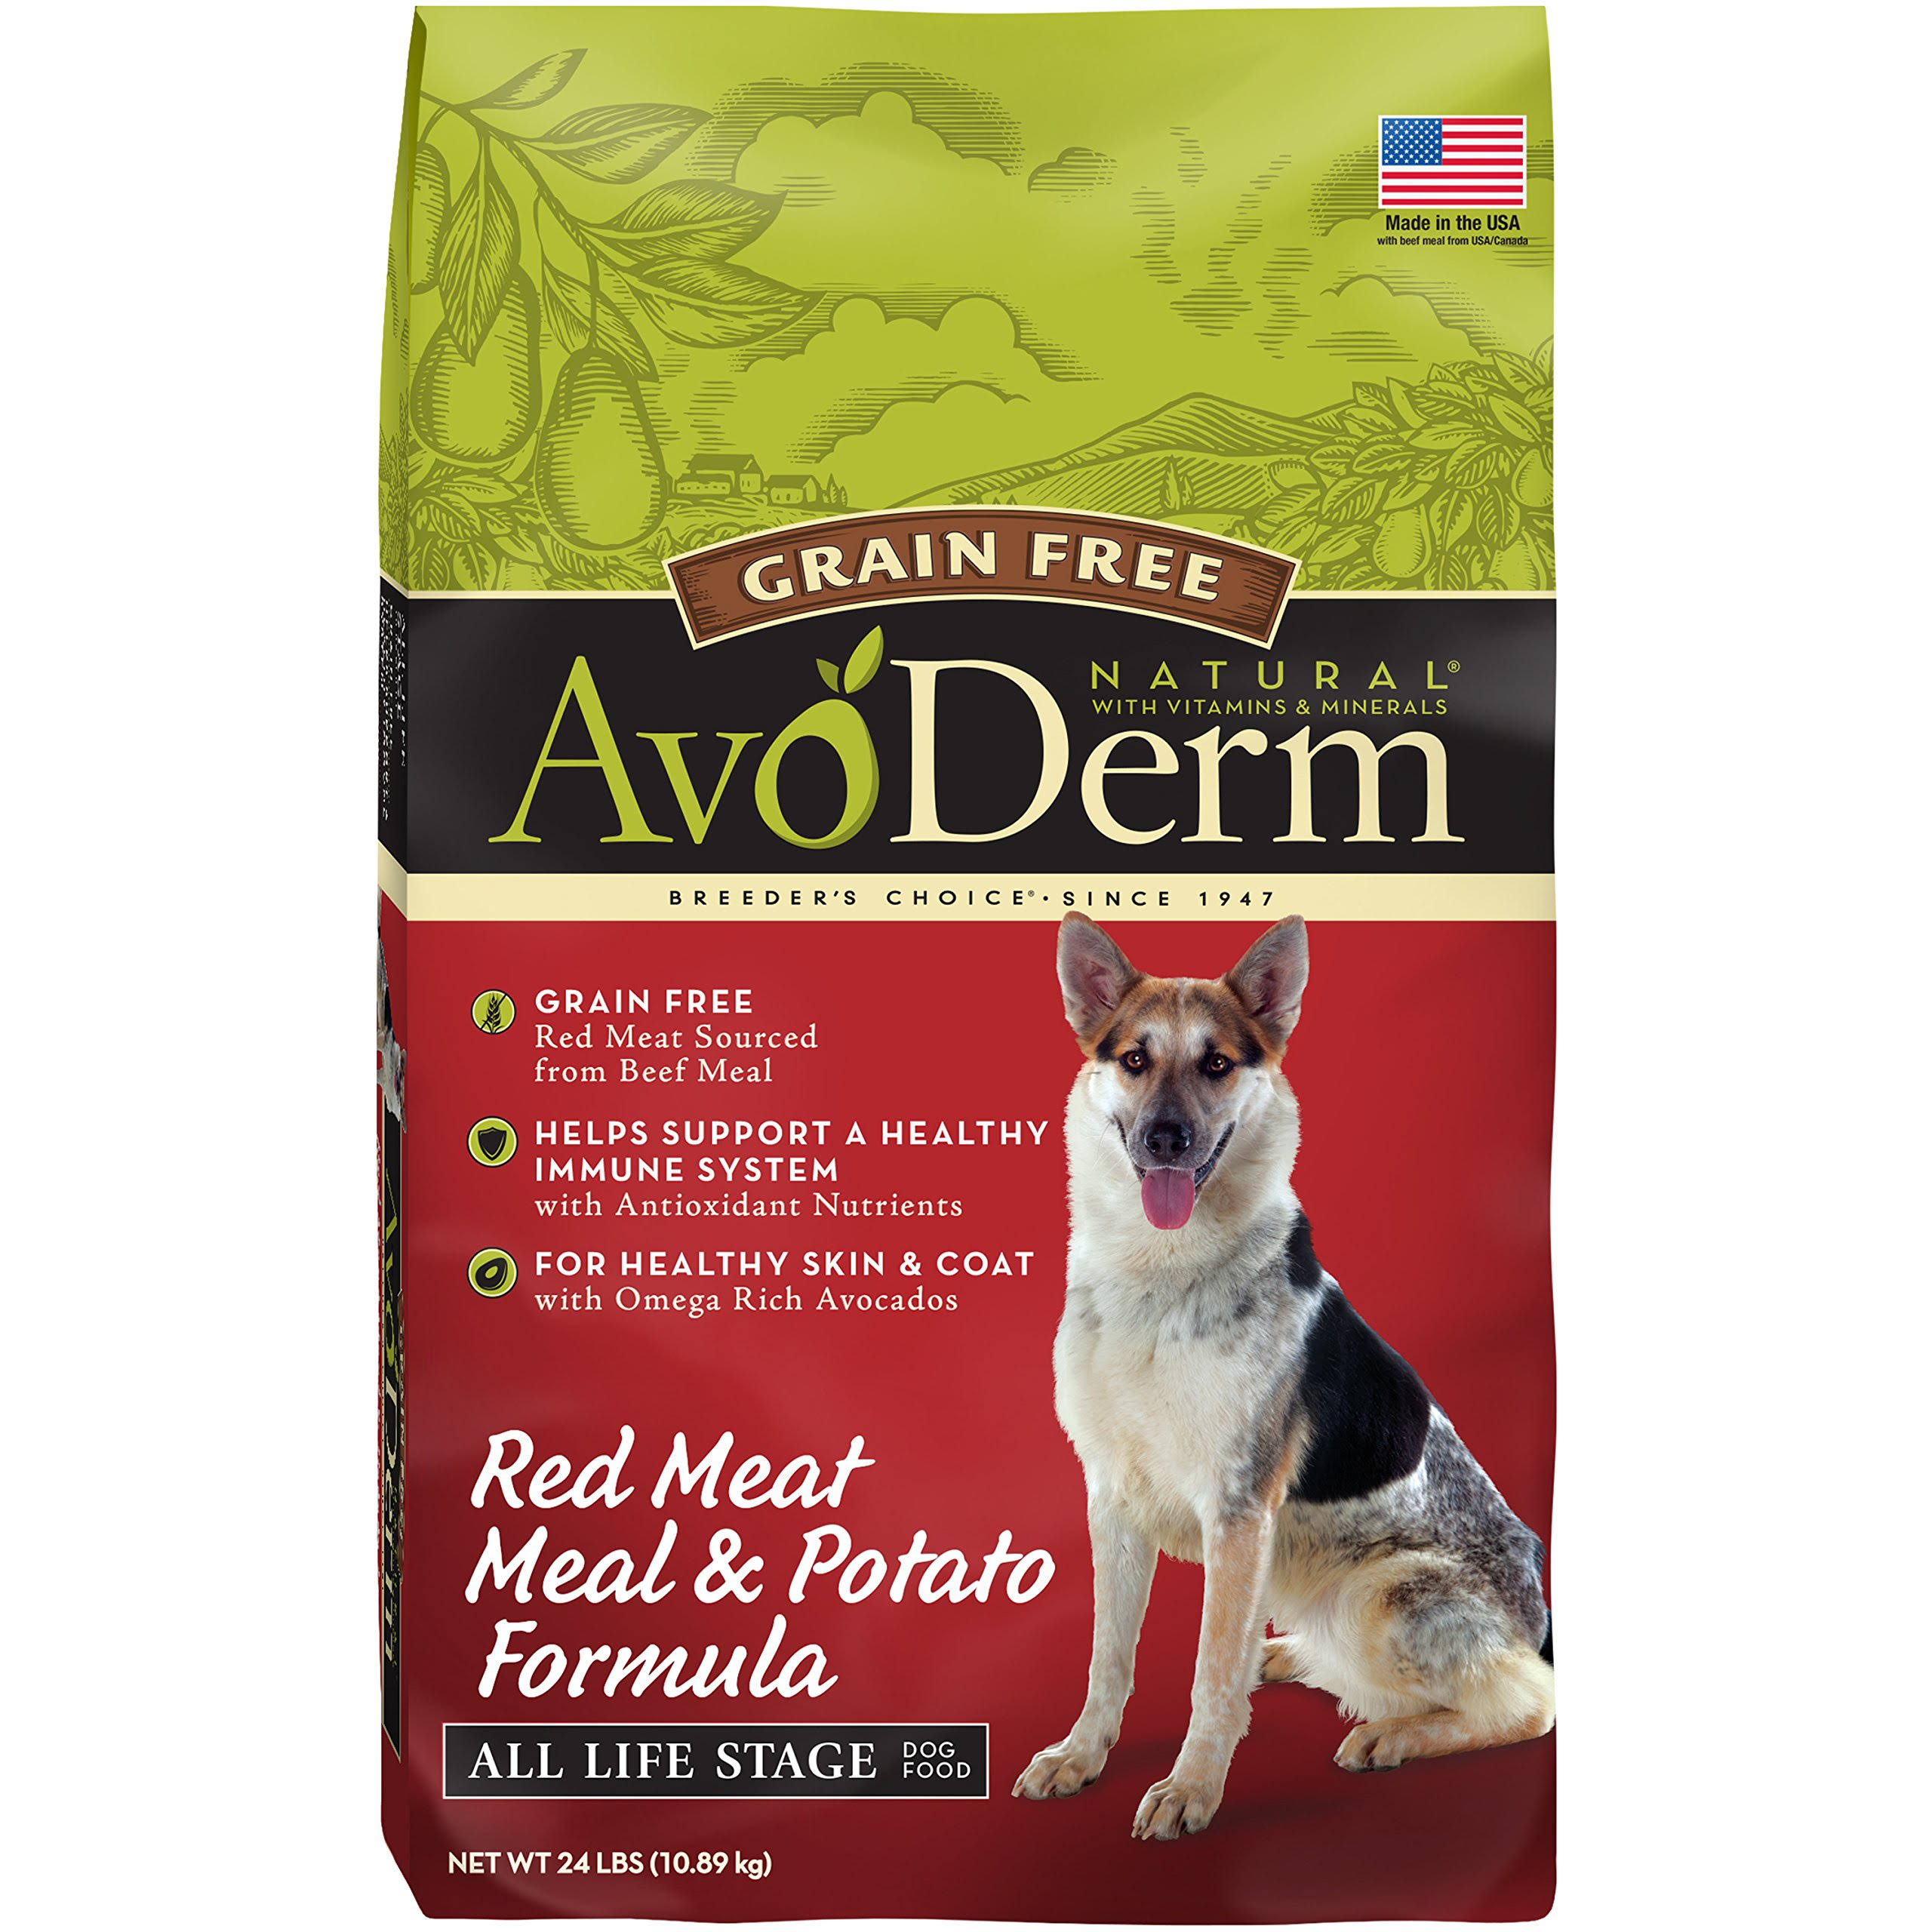 AvoDerm Natural Dog Food - Grain Free, Red Meat, 24lbs